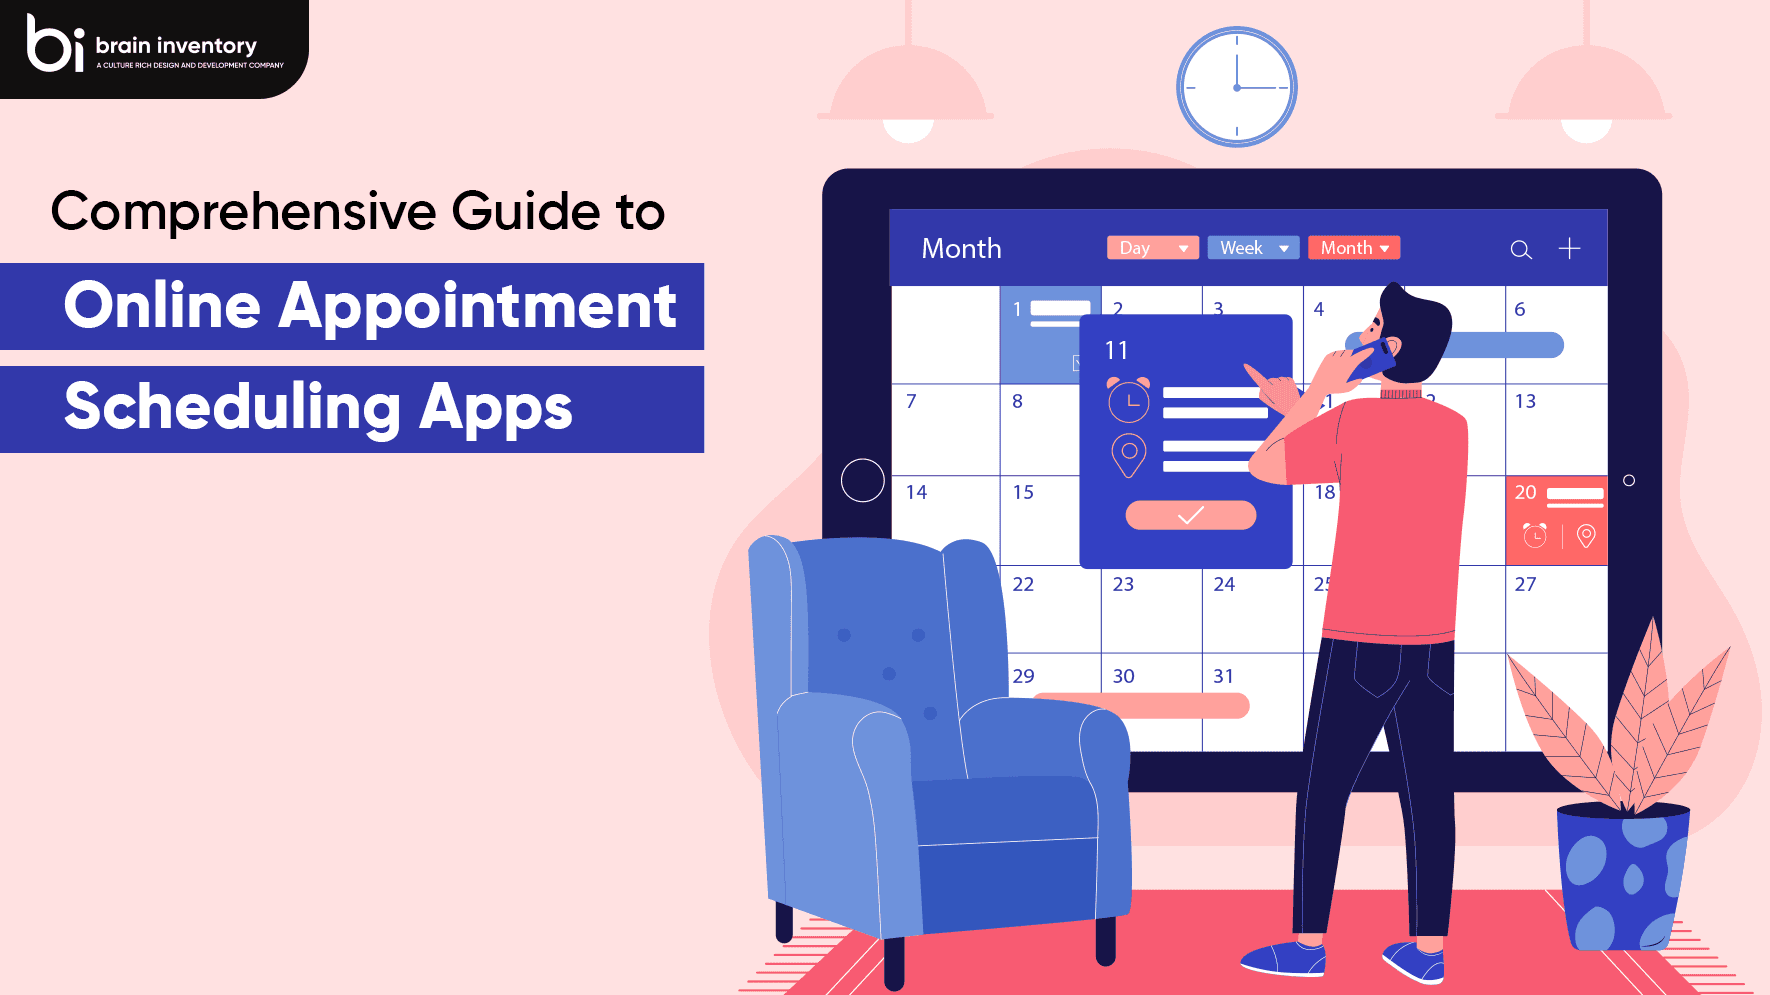 Comprehensive Guide to Online Appointment Scheduling Apps